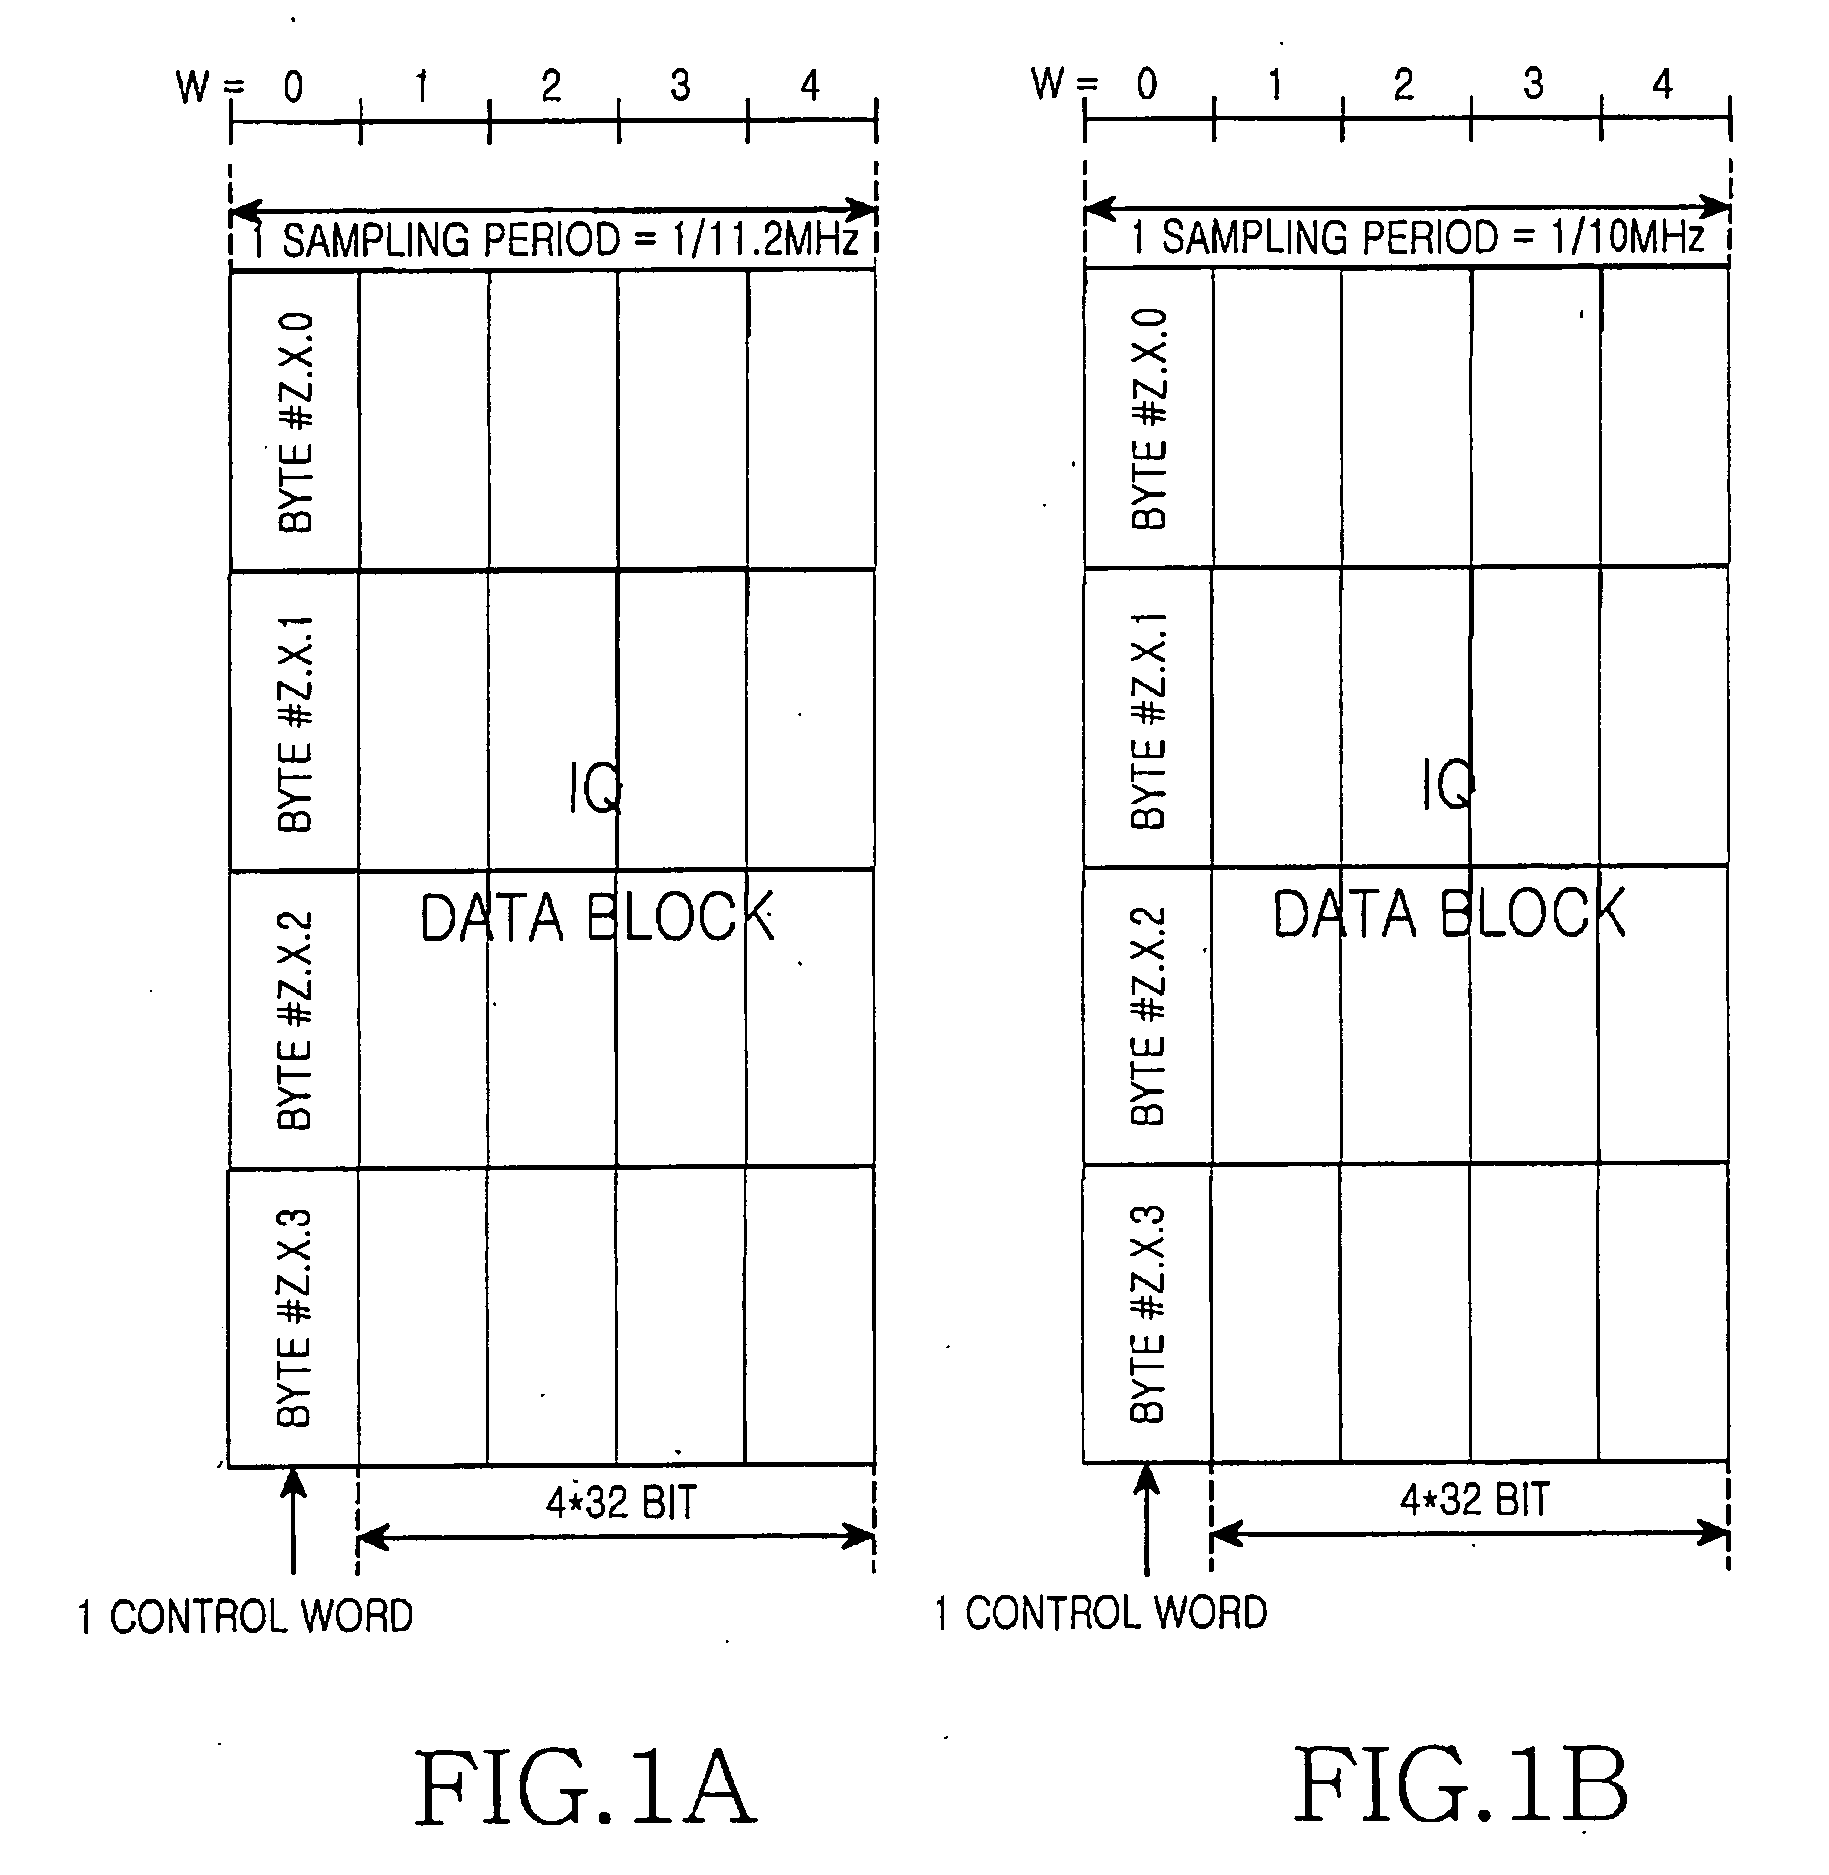 Apparatus and method for communication between a digital unit and a remote RF unit in a broadband wireless communication system